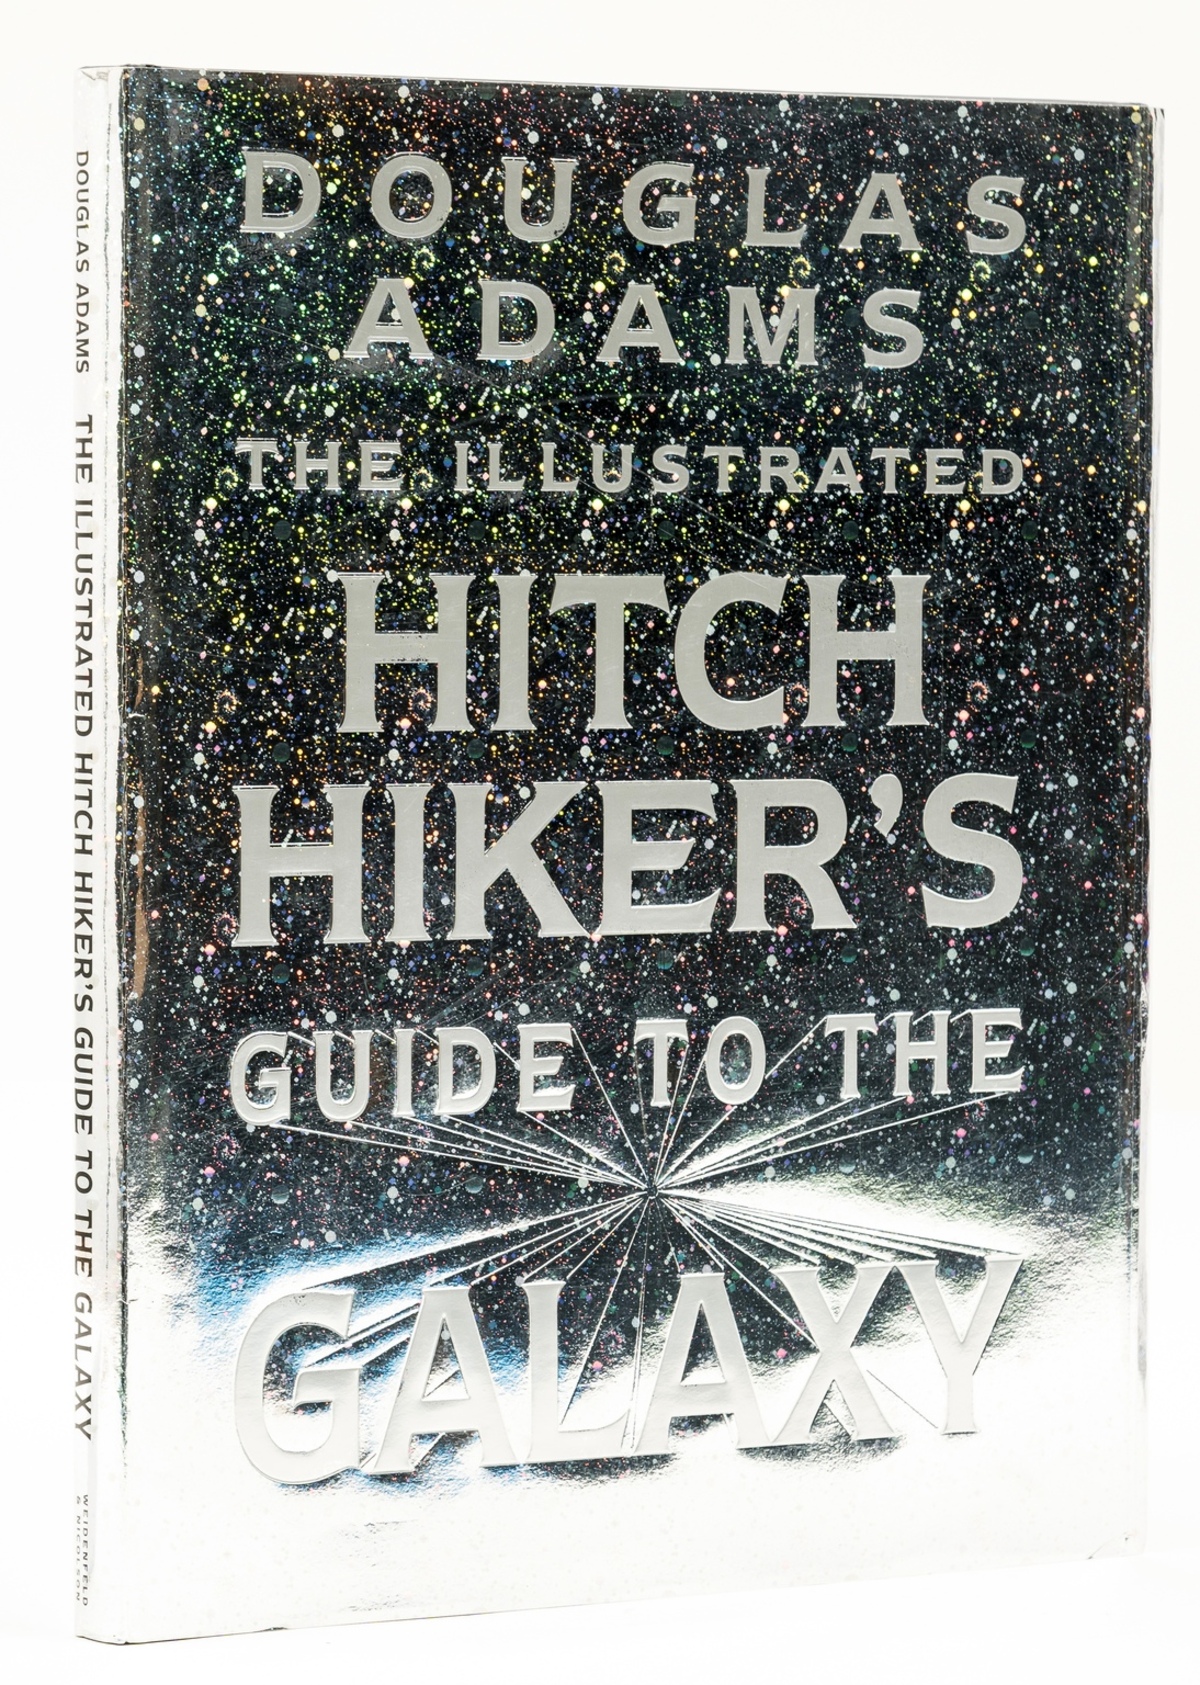 Adams (Douglas) The Illustrated Hitch Hiker's Guide to the Galaxy, signed by the author, 1994.